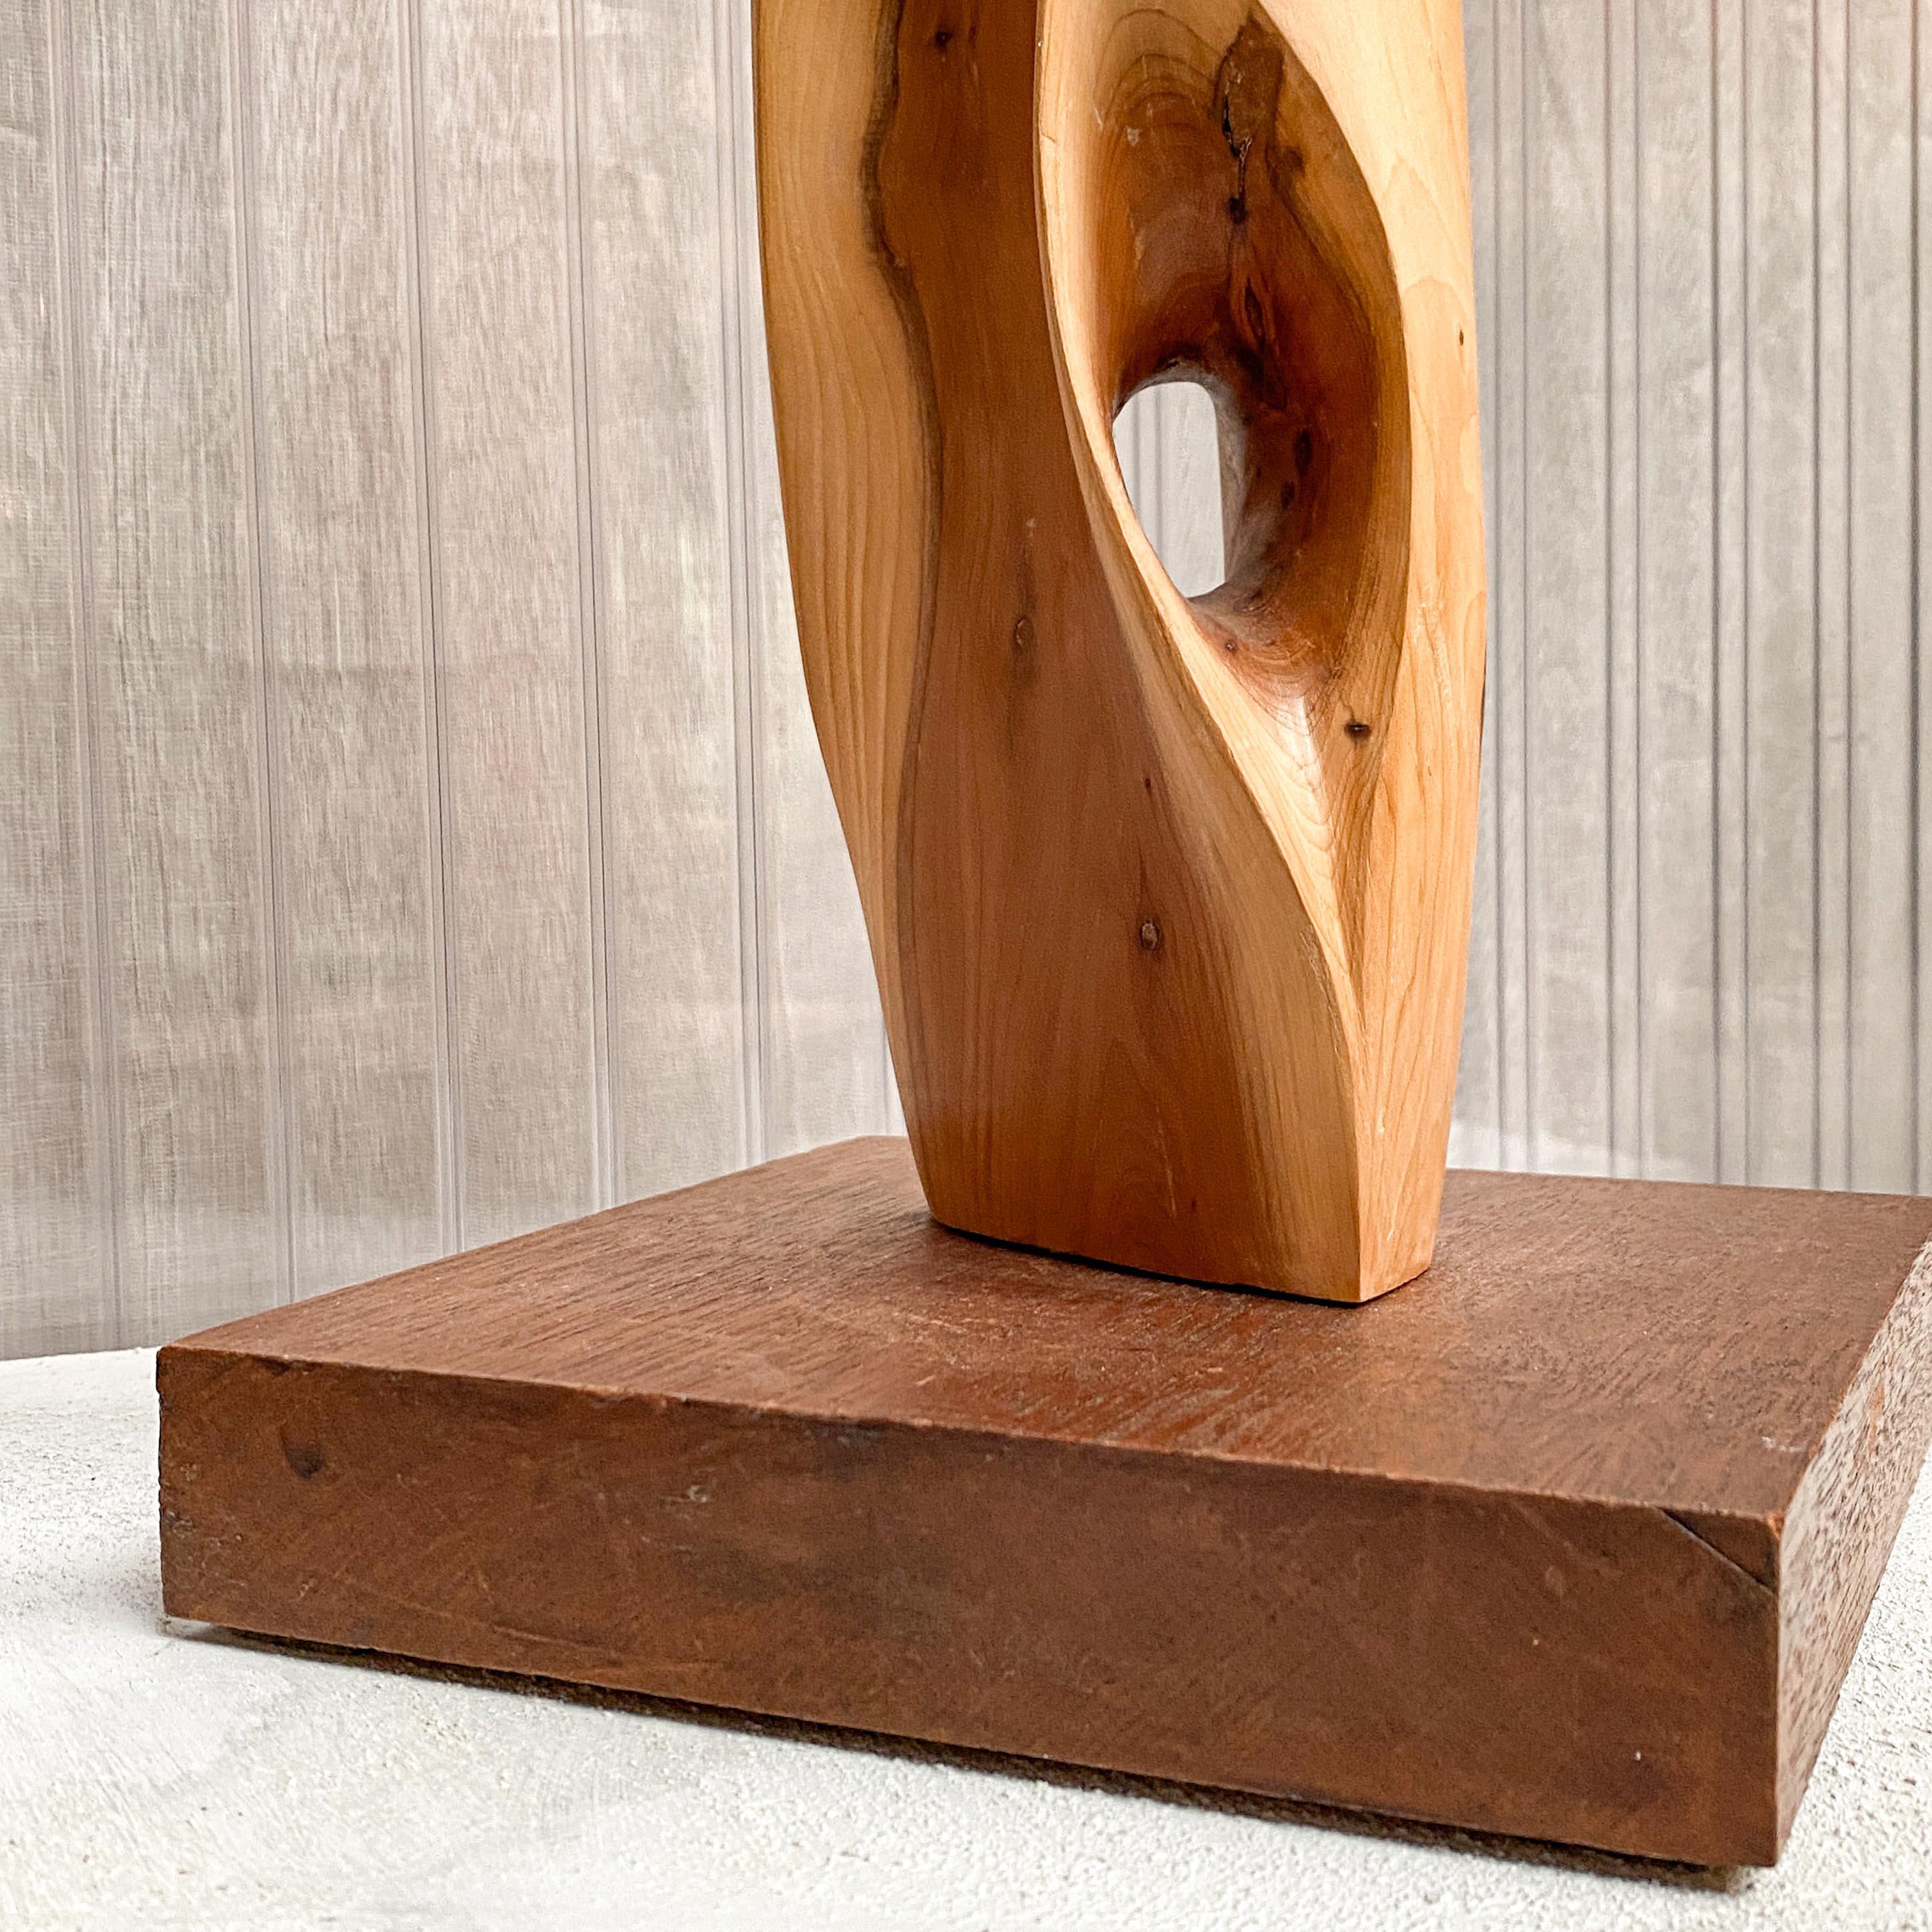 Dutch Modernist Wooden Sculpture in Abstract Intricate TOTEM Shape on a Wooden Base For Sale